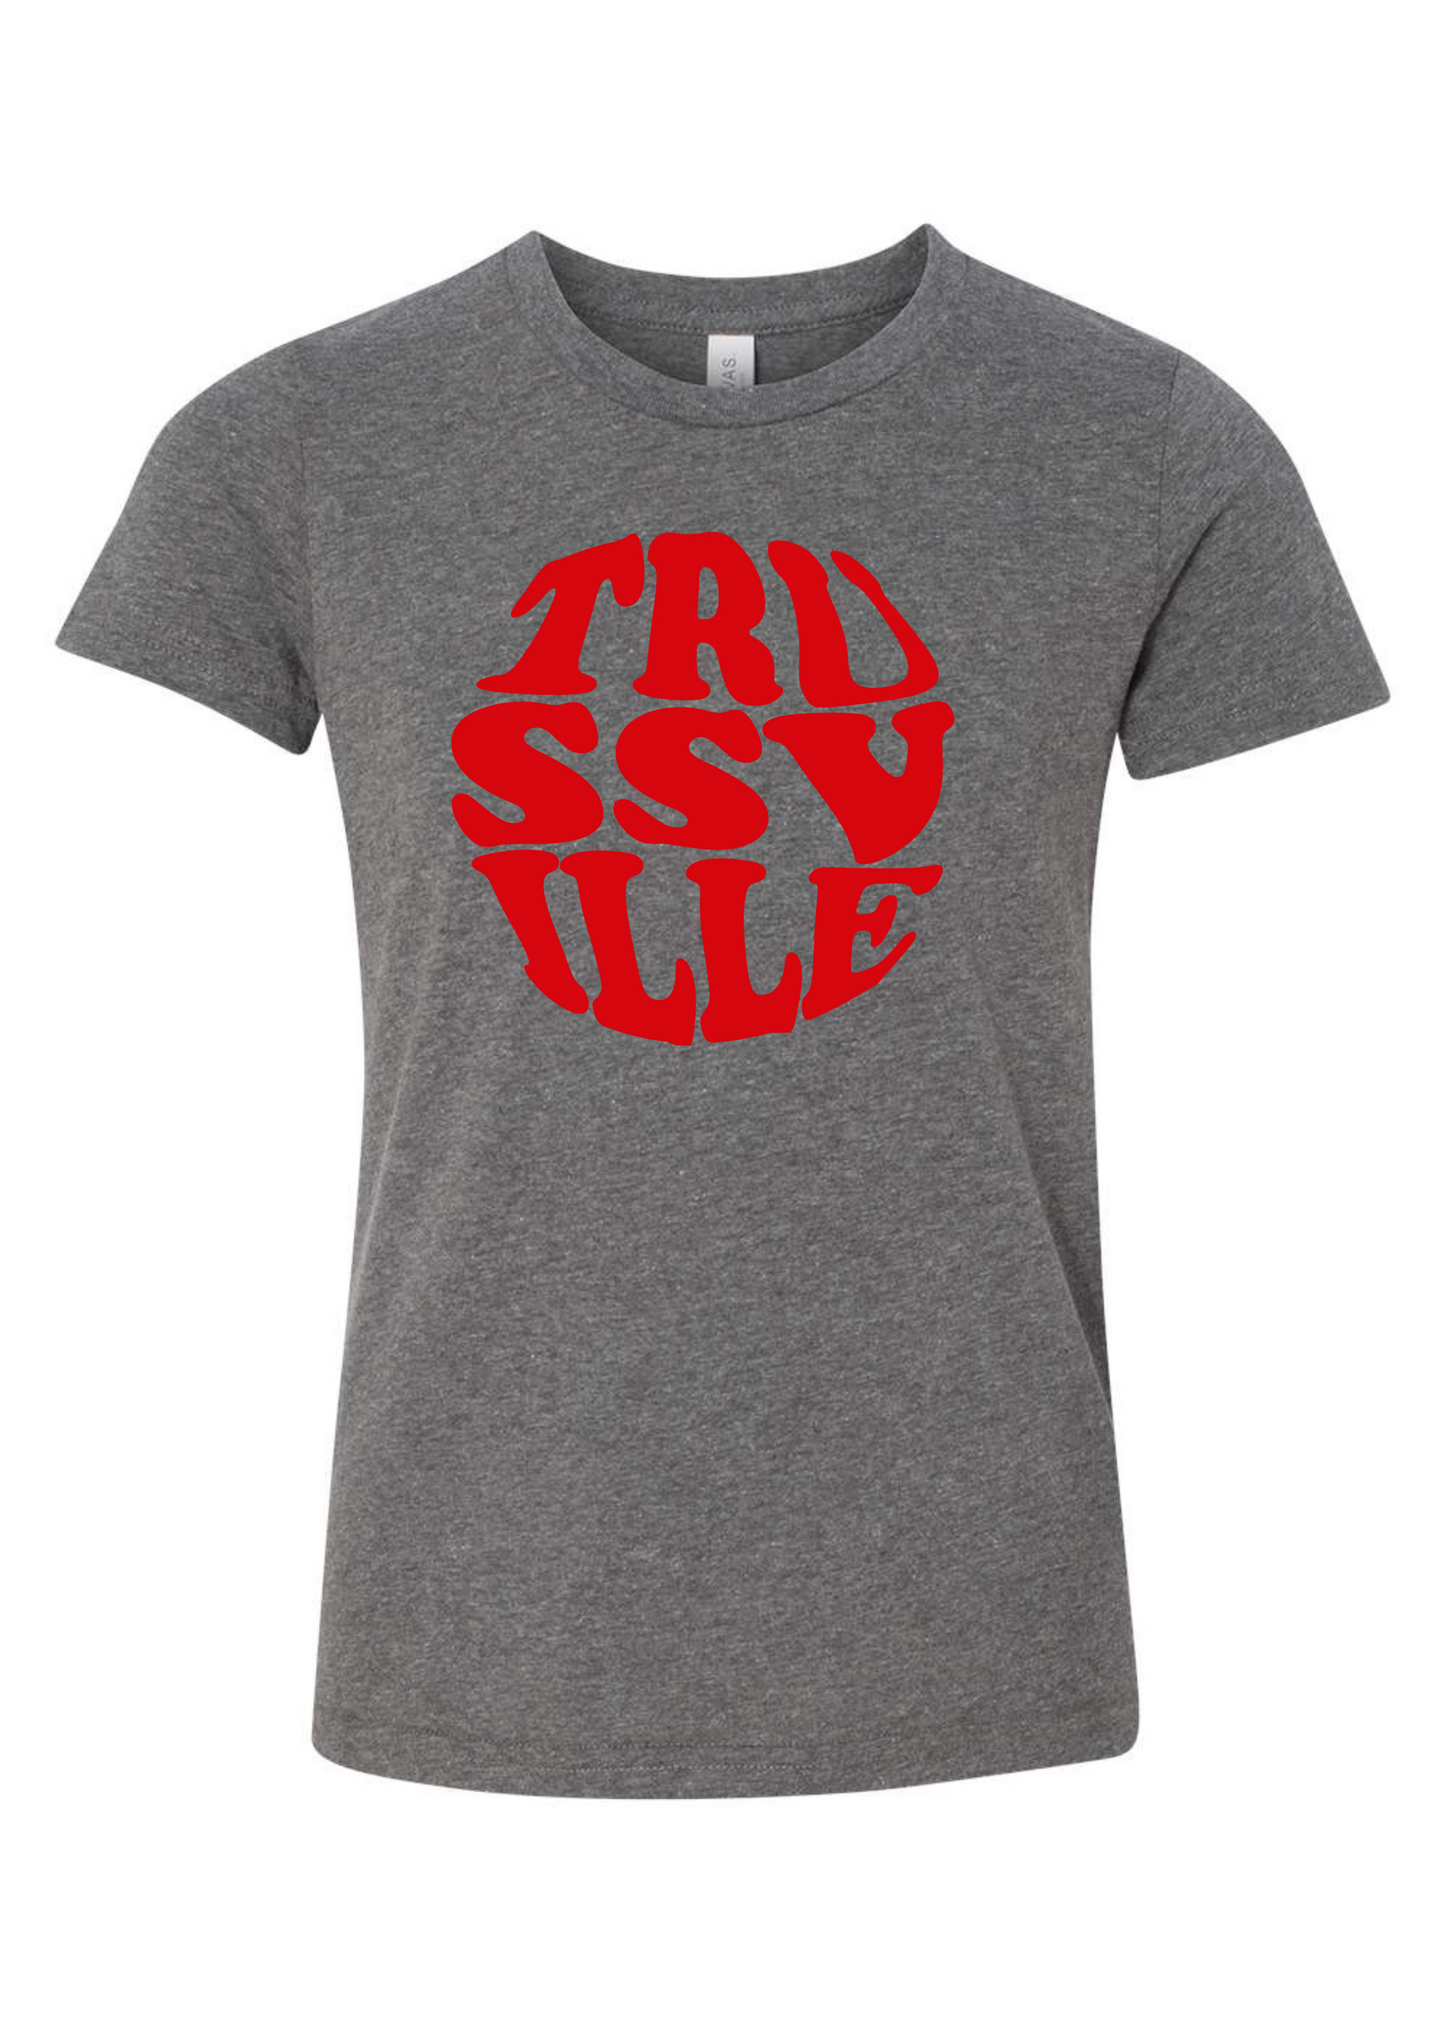 Trussville Circle | Kids Tee-Kids Tees-Sister Shirts-Sister Shirts, Cute & Custom Tees for Mama & Littles in Trussville, Alabama.